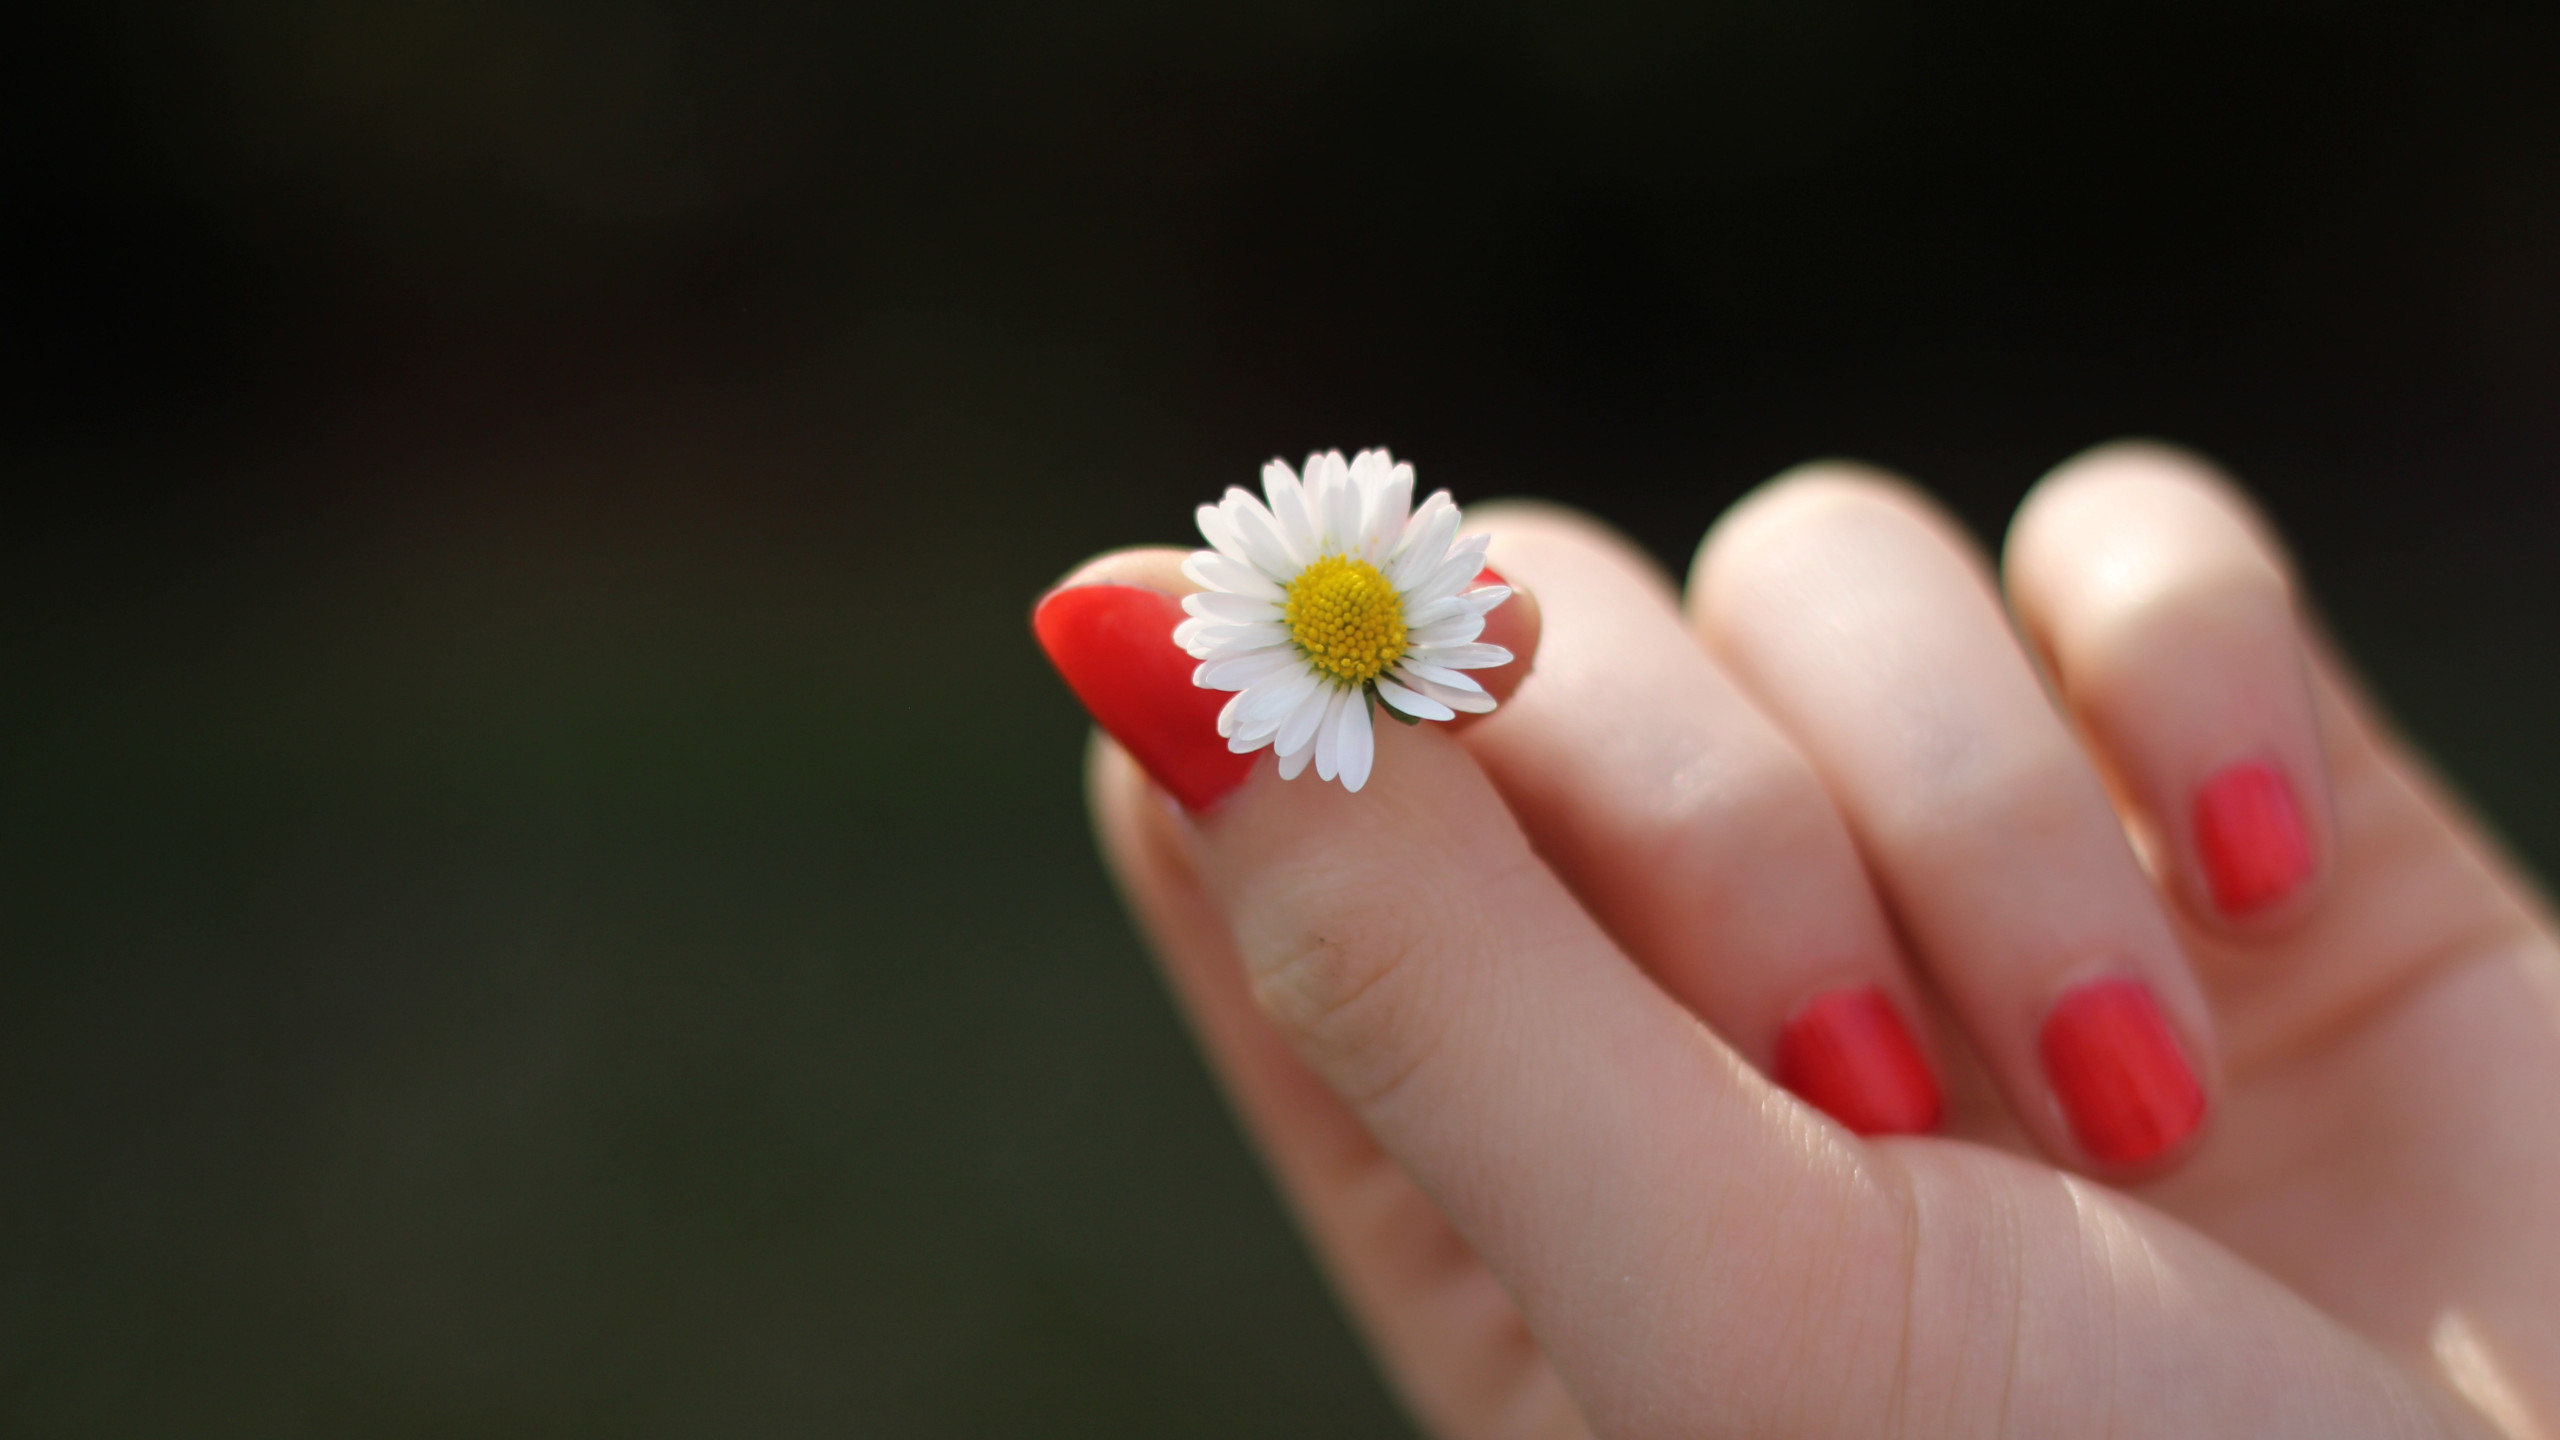 Girl with red nails and a daisy flower wallpaper 2560x1440